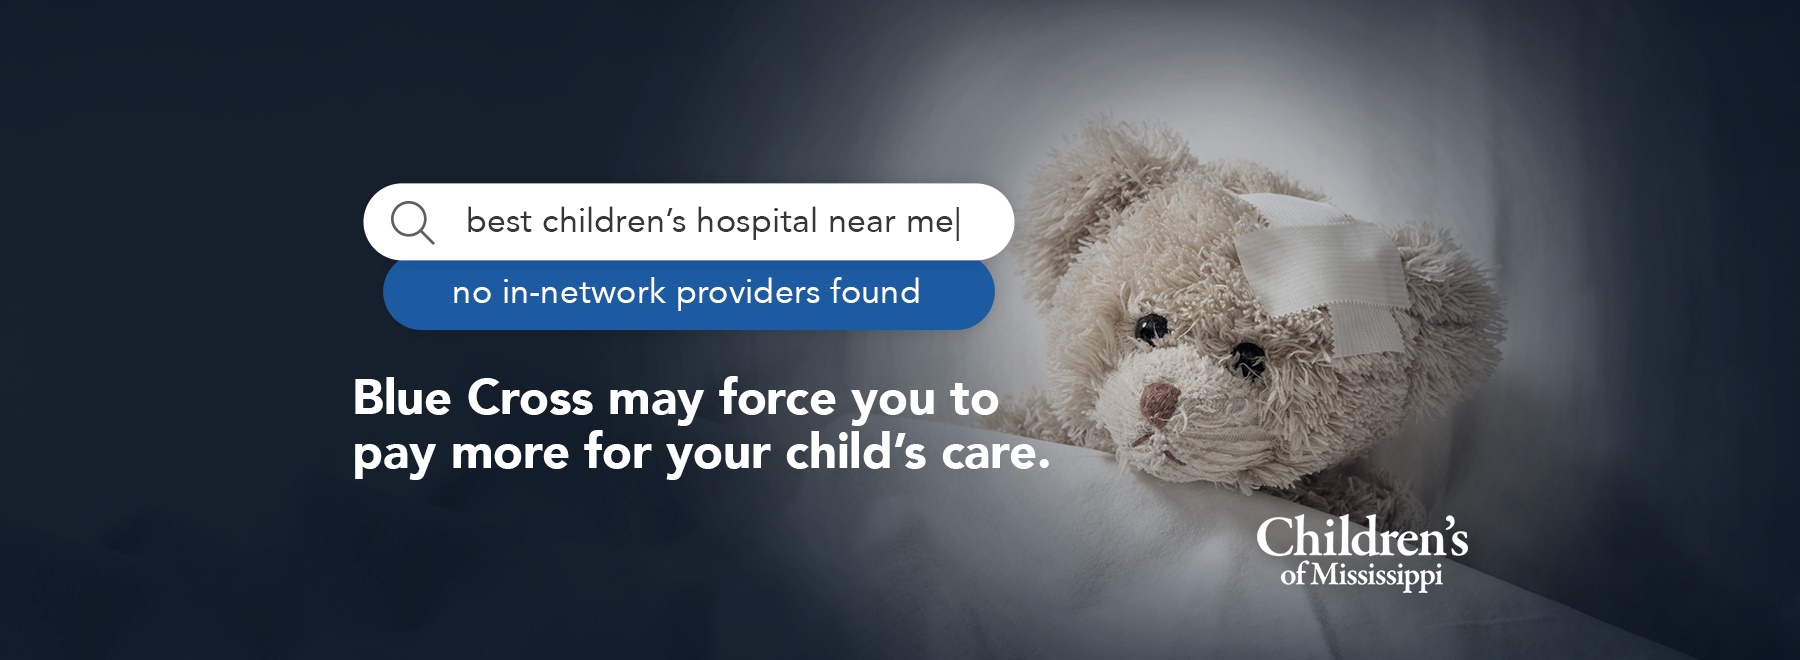 Best children's hospital near me. No in-network providers found. Blue Cross may force you to pay more for your child's care.